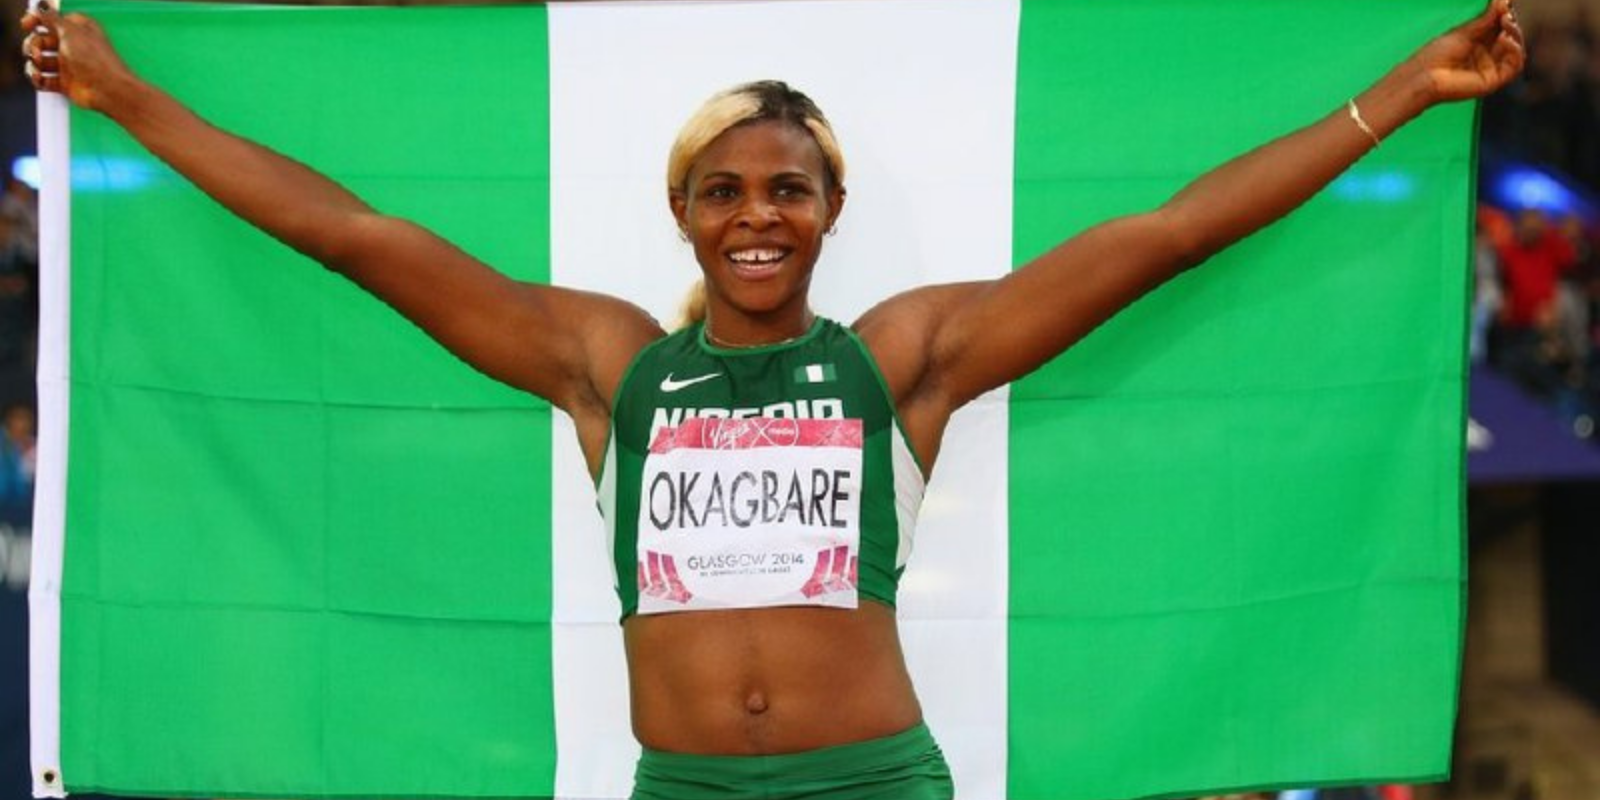 What sport does Blessing Okagbare participate in?